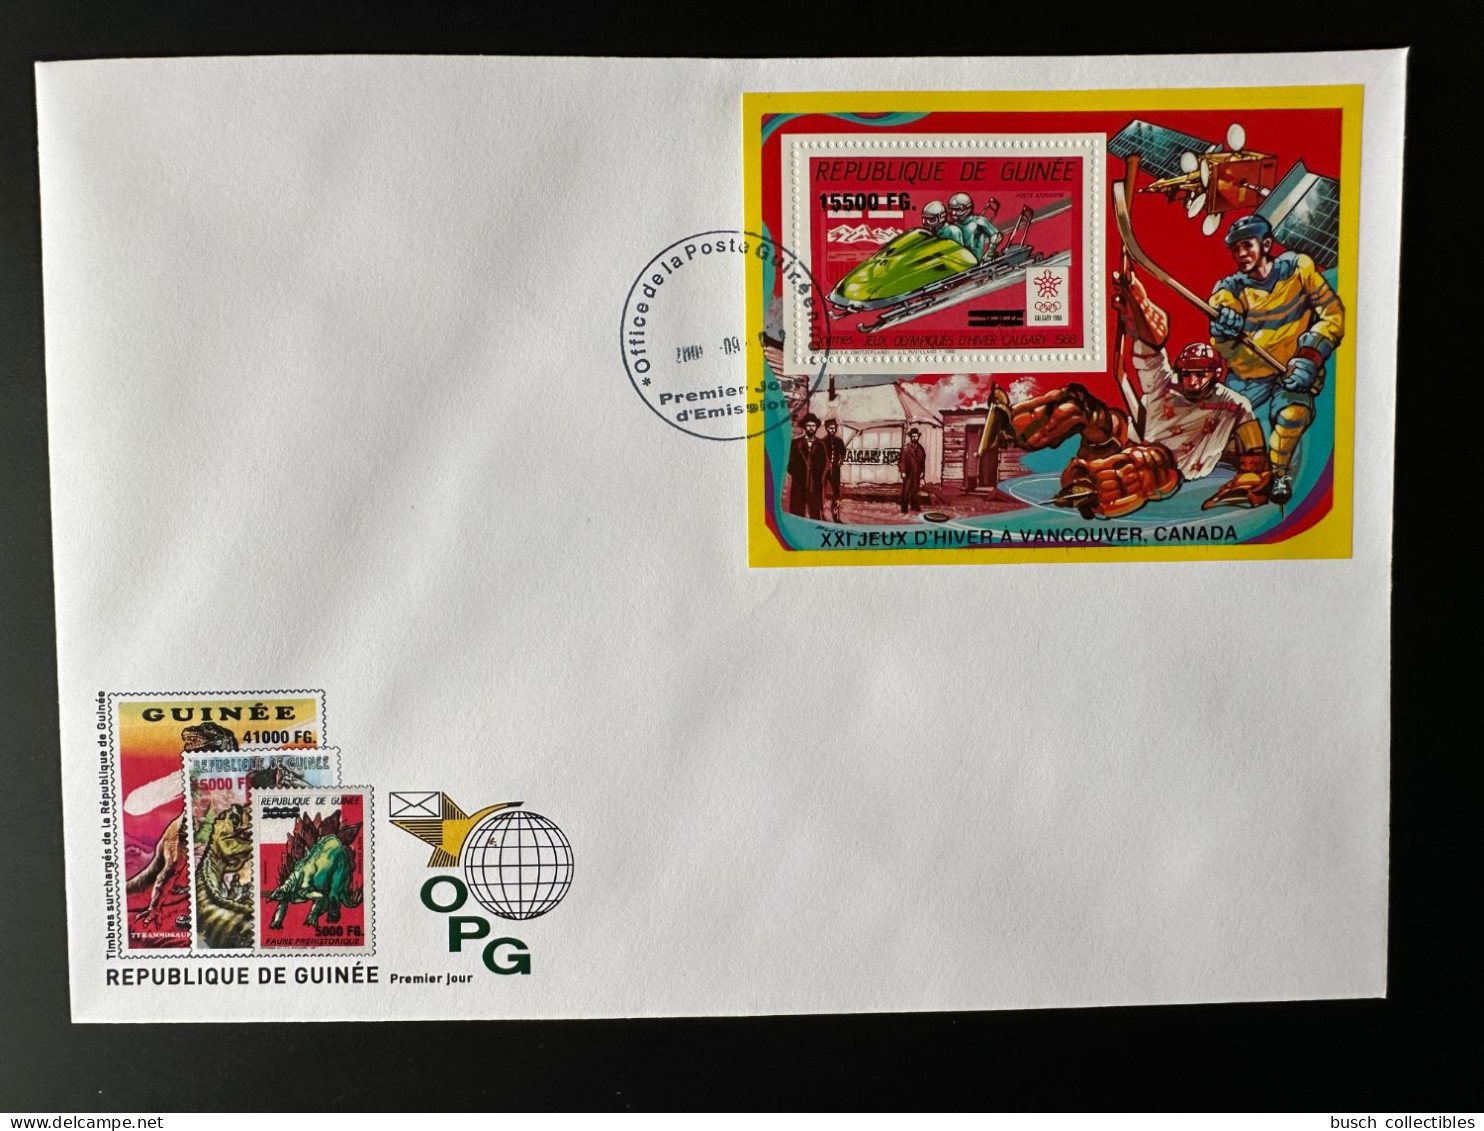 Guinée Guinea 2009 FDC Mi. Bl. 1727 Surch Overprint Winter Olympic Calgary 1988 Vancouver 2010 Jeux Olympiques Bobsleigh - Hiver 2010: Vancouver